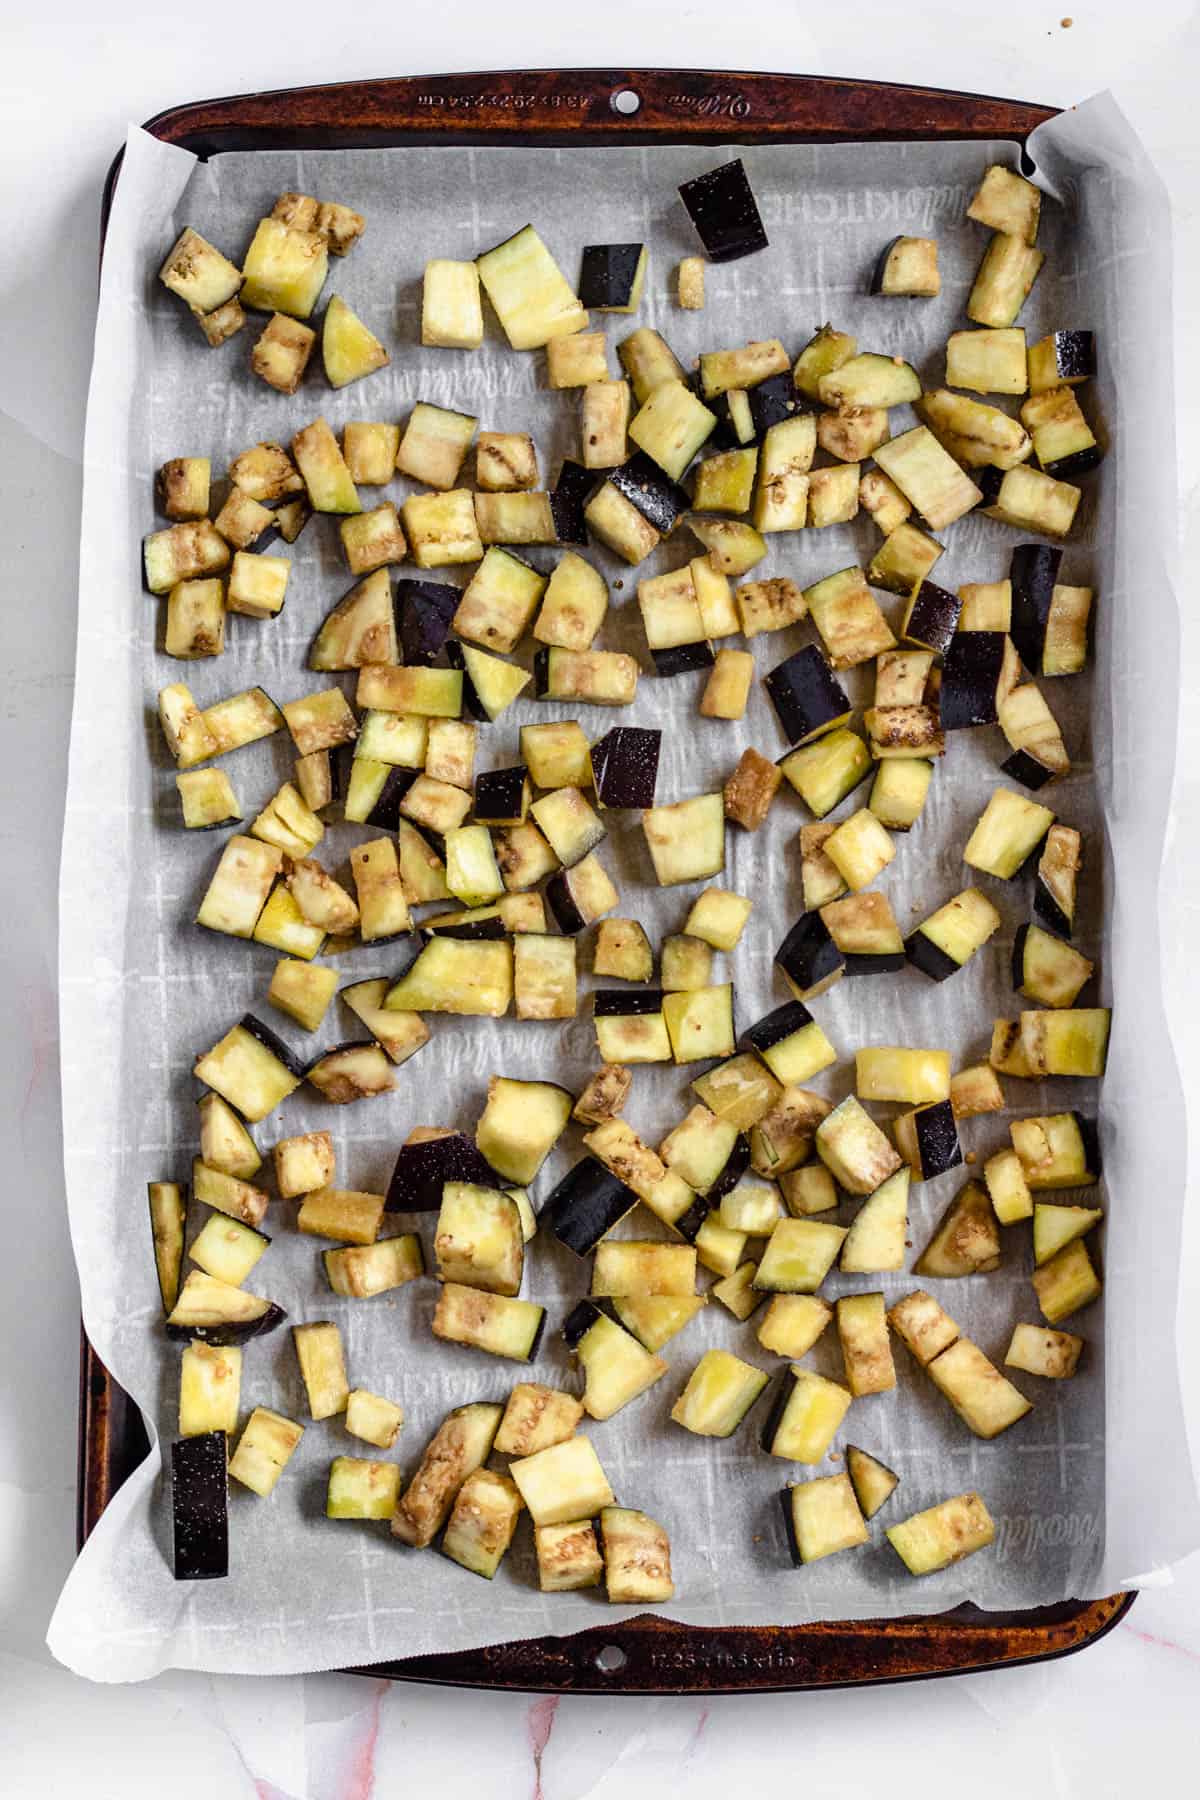 diced eggplant coated with olive oil, salt, onion and garlic powder on a baking sheet